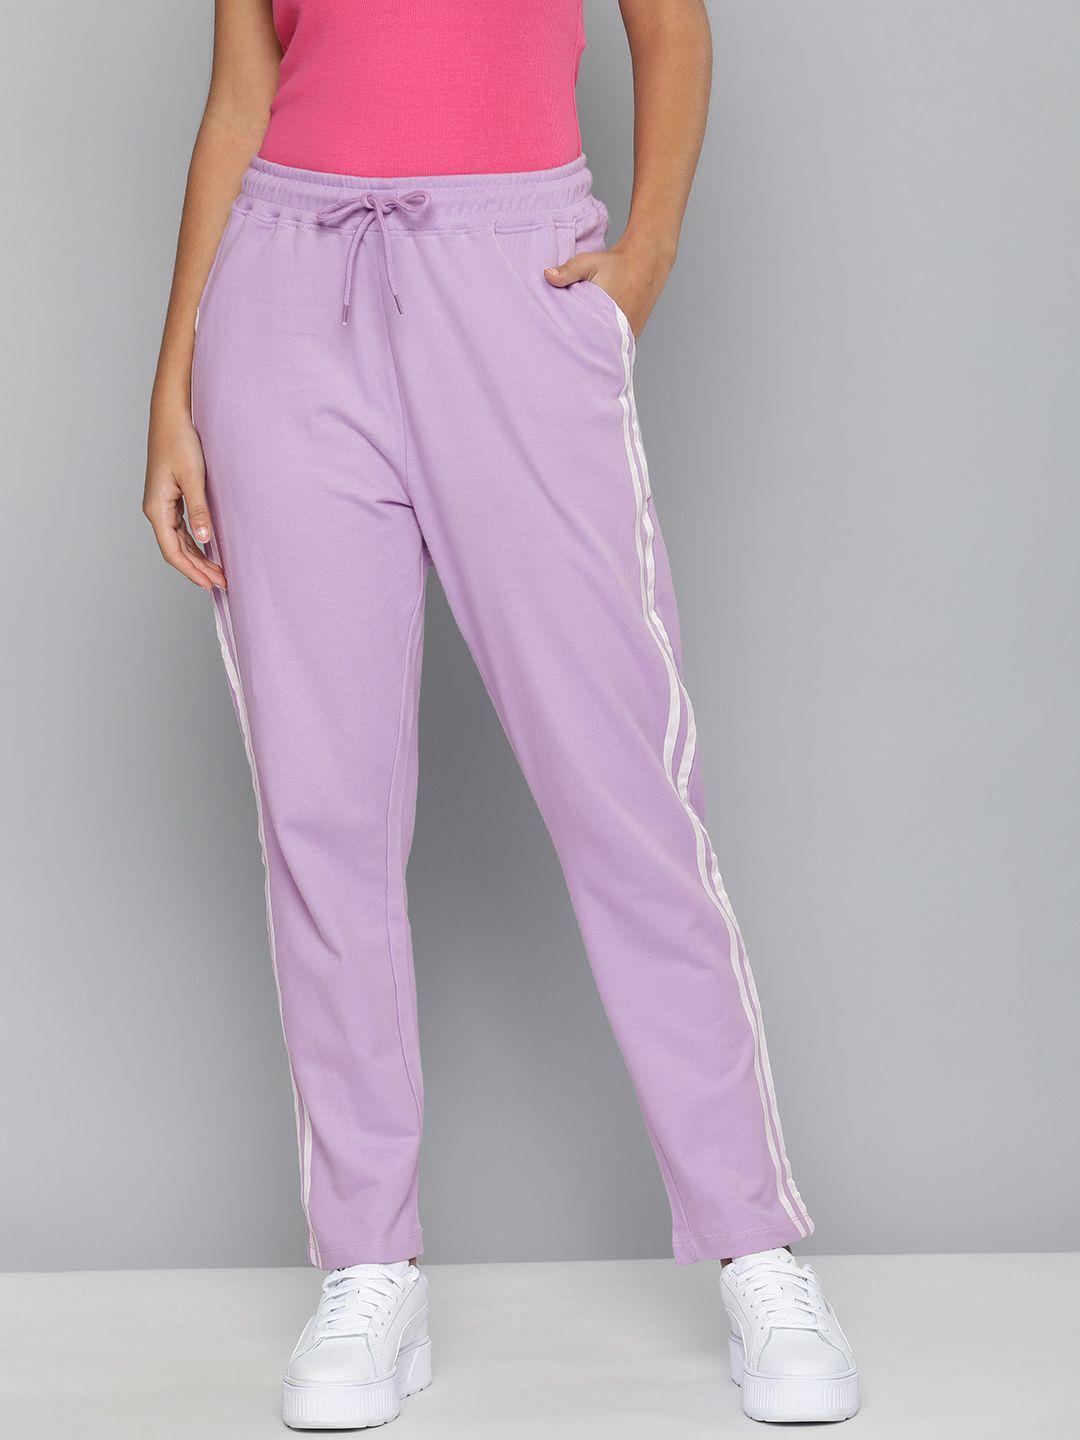 here&now women purple side striped regular fit knitted pure cotton track pants